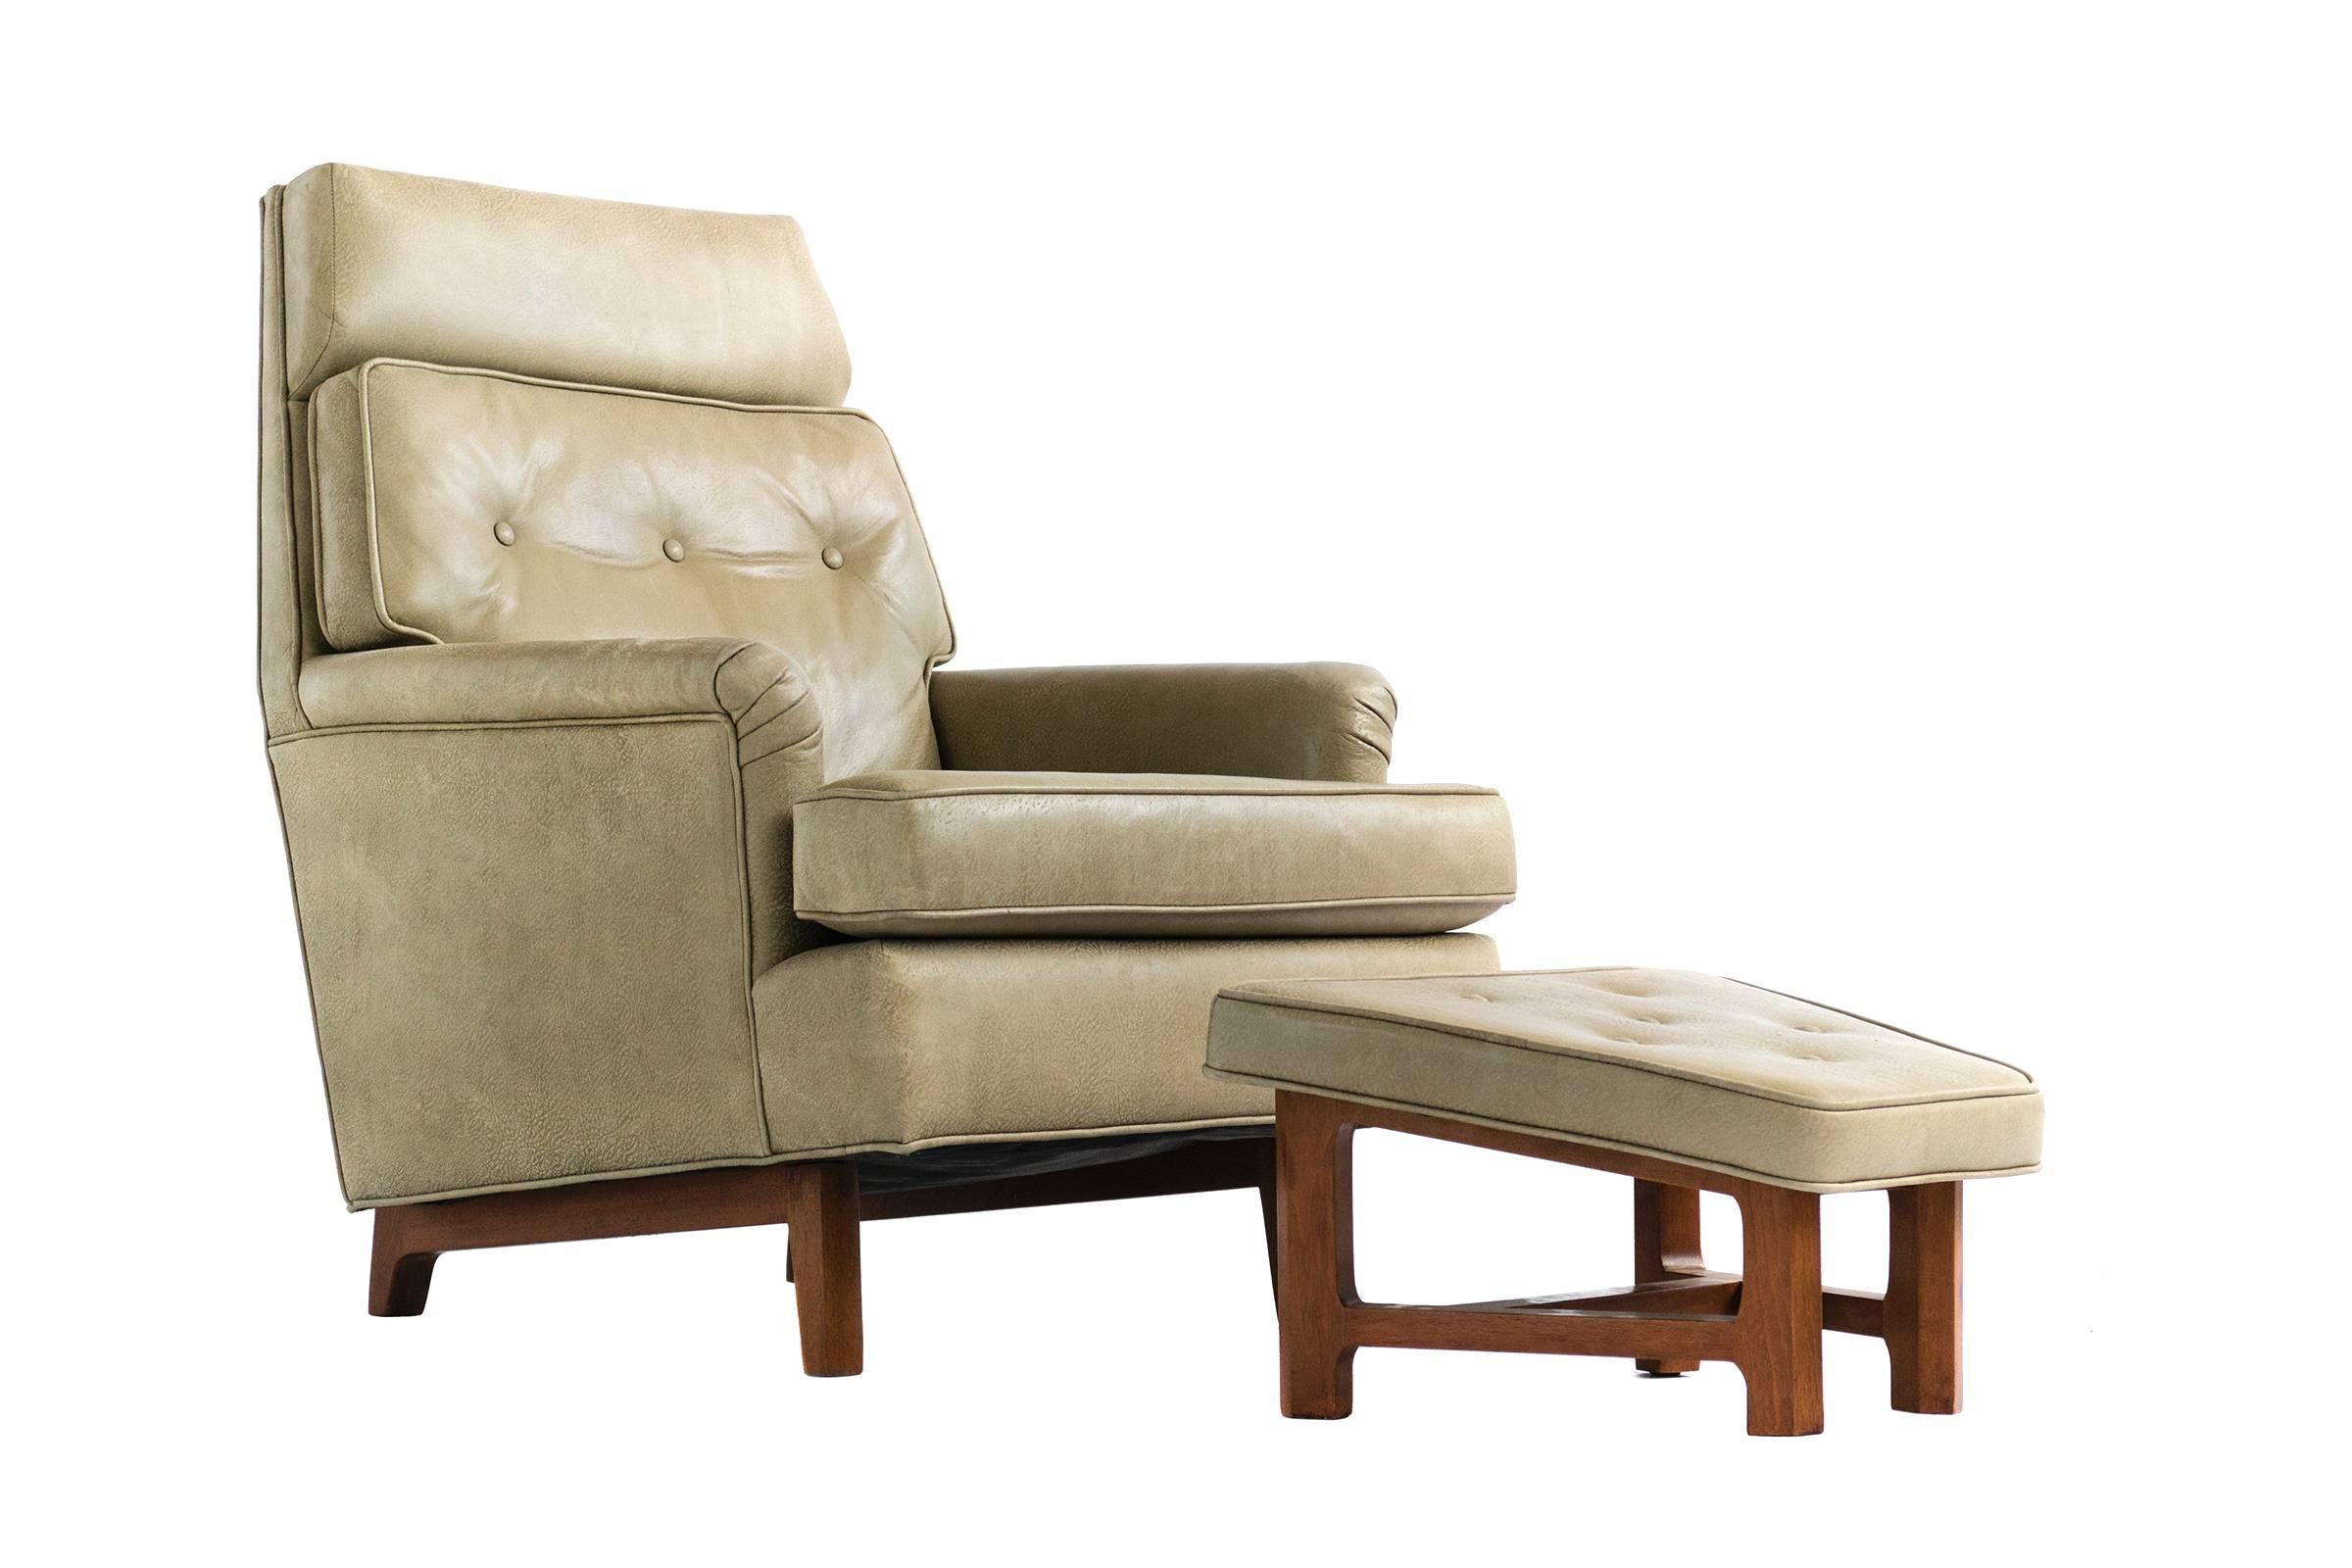 Mid-20th Century Edward Wormley Lounge Chair and Ottoman